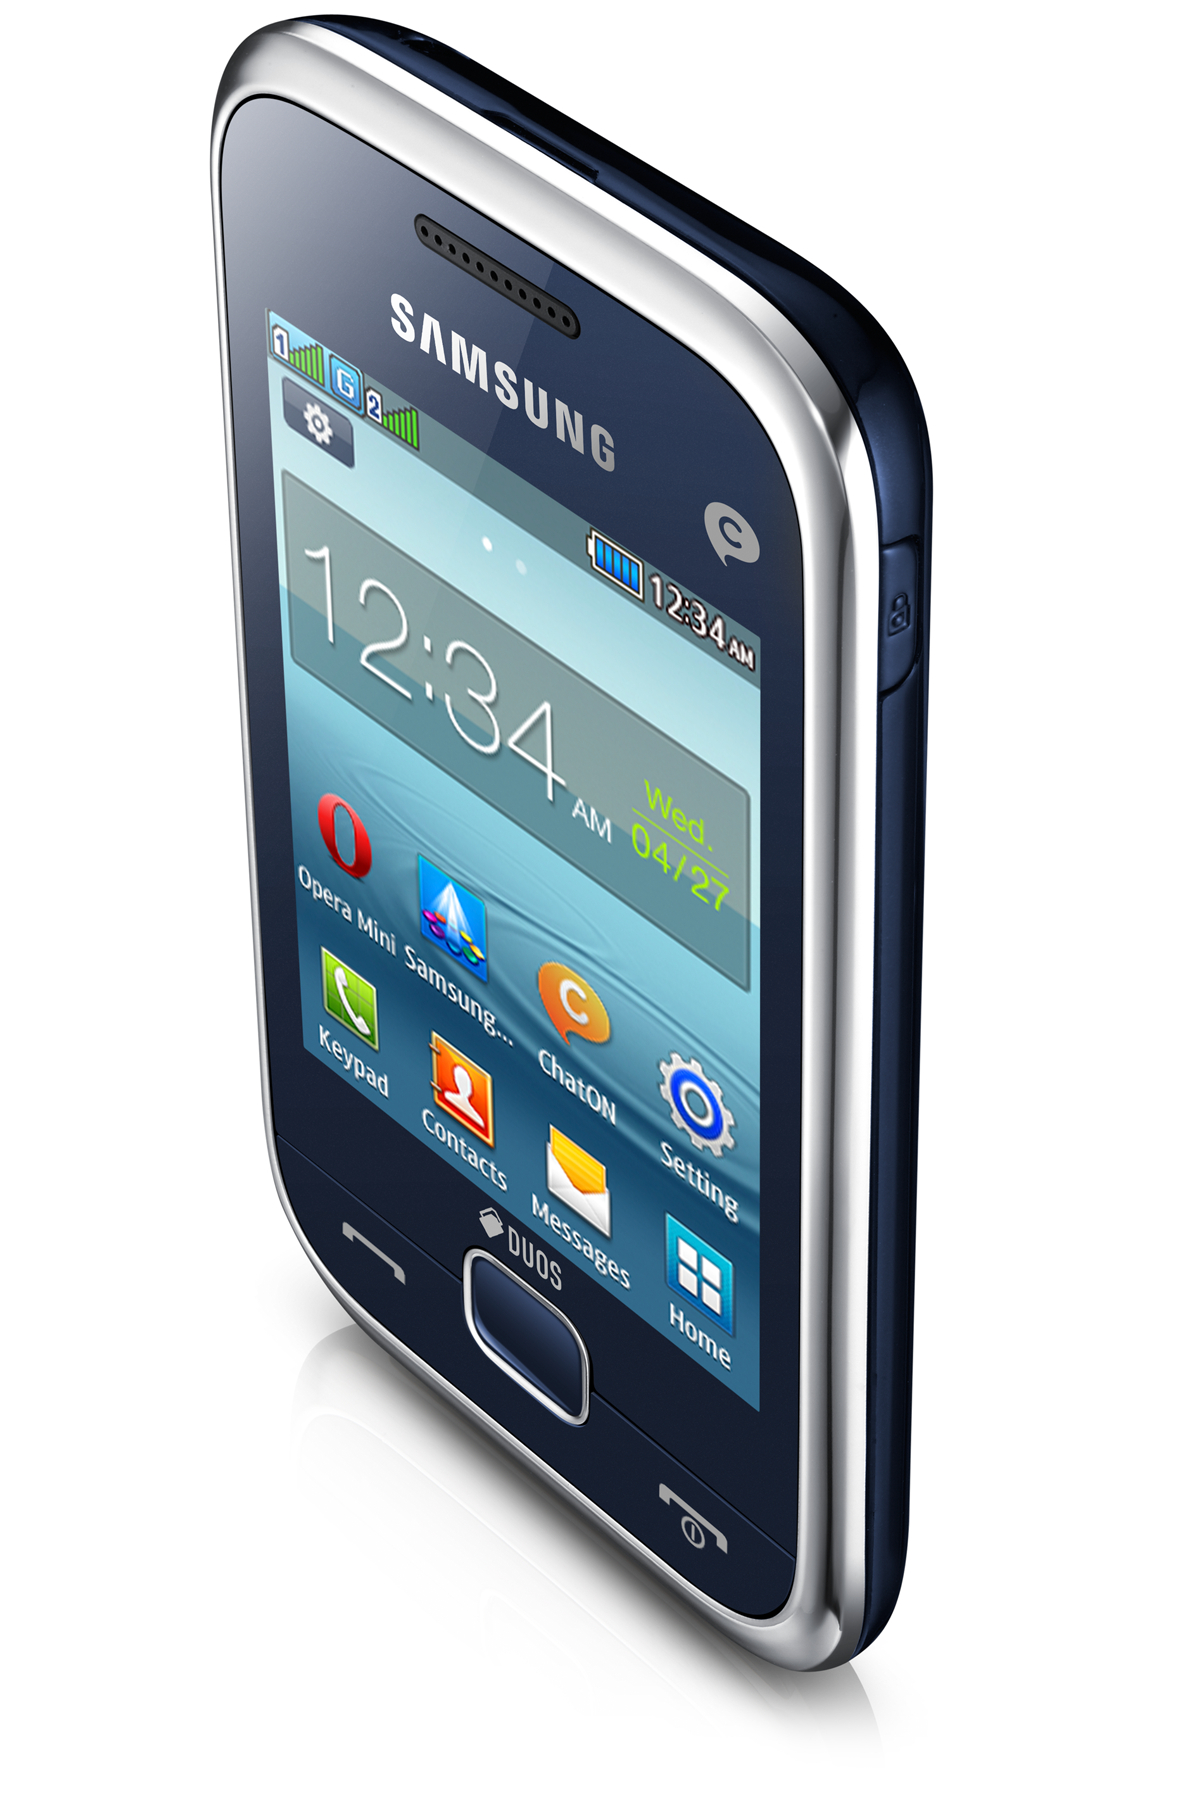 Free Themes For Samsung Champ Deluxe C3312